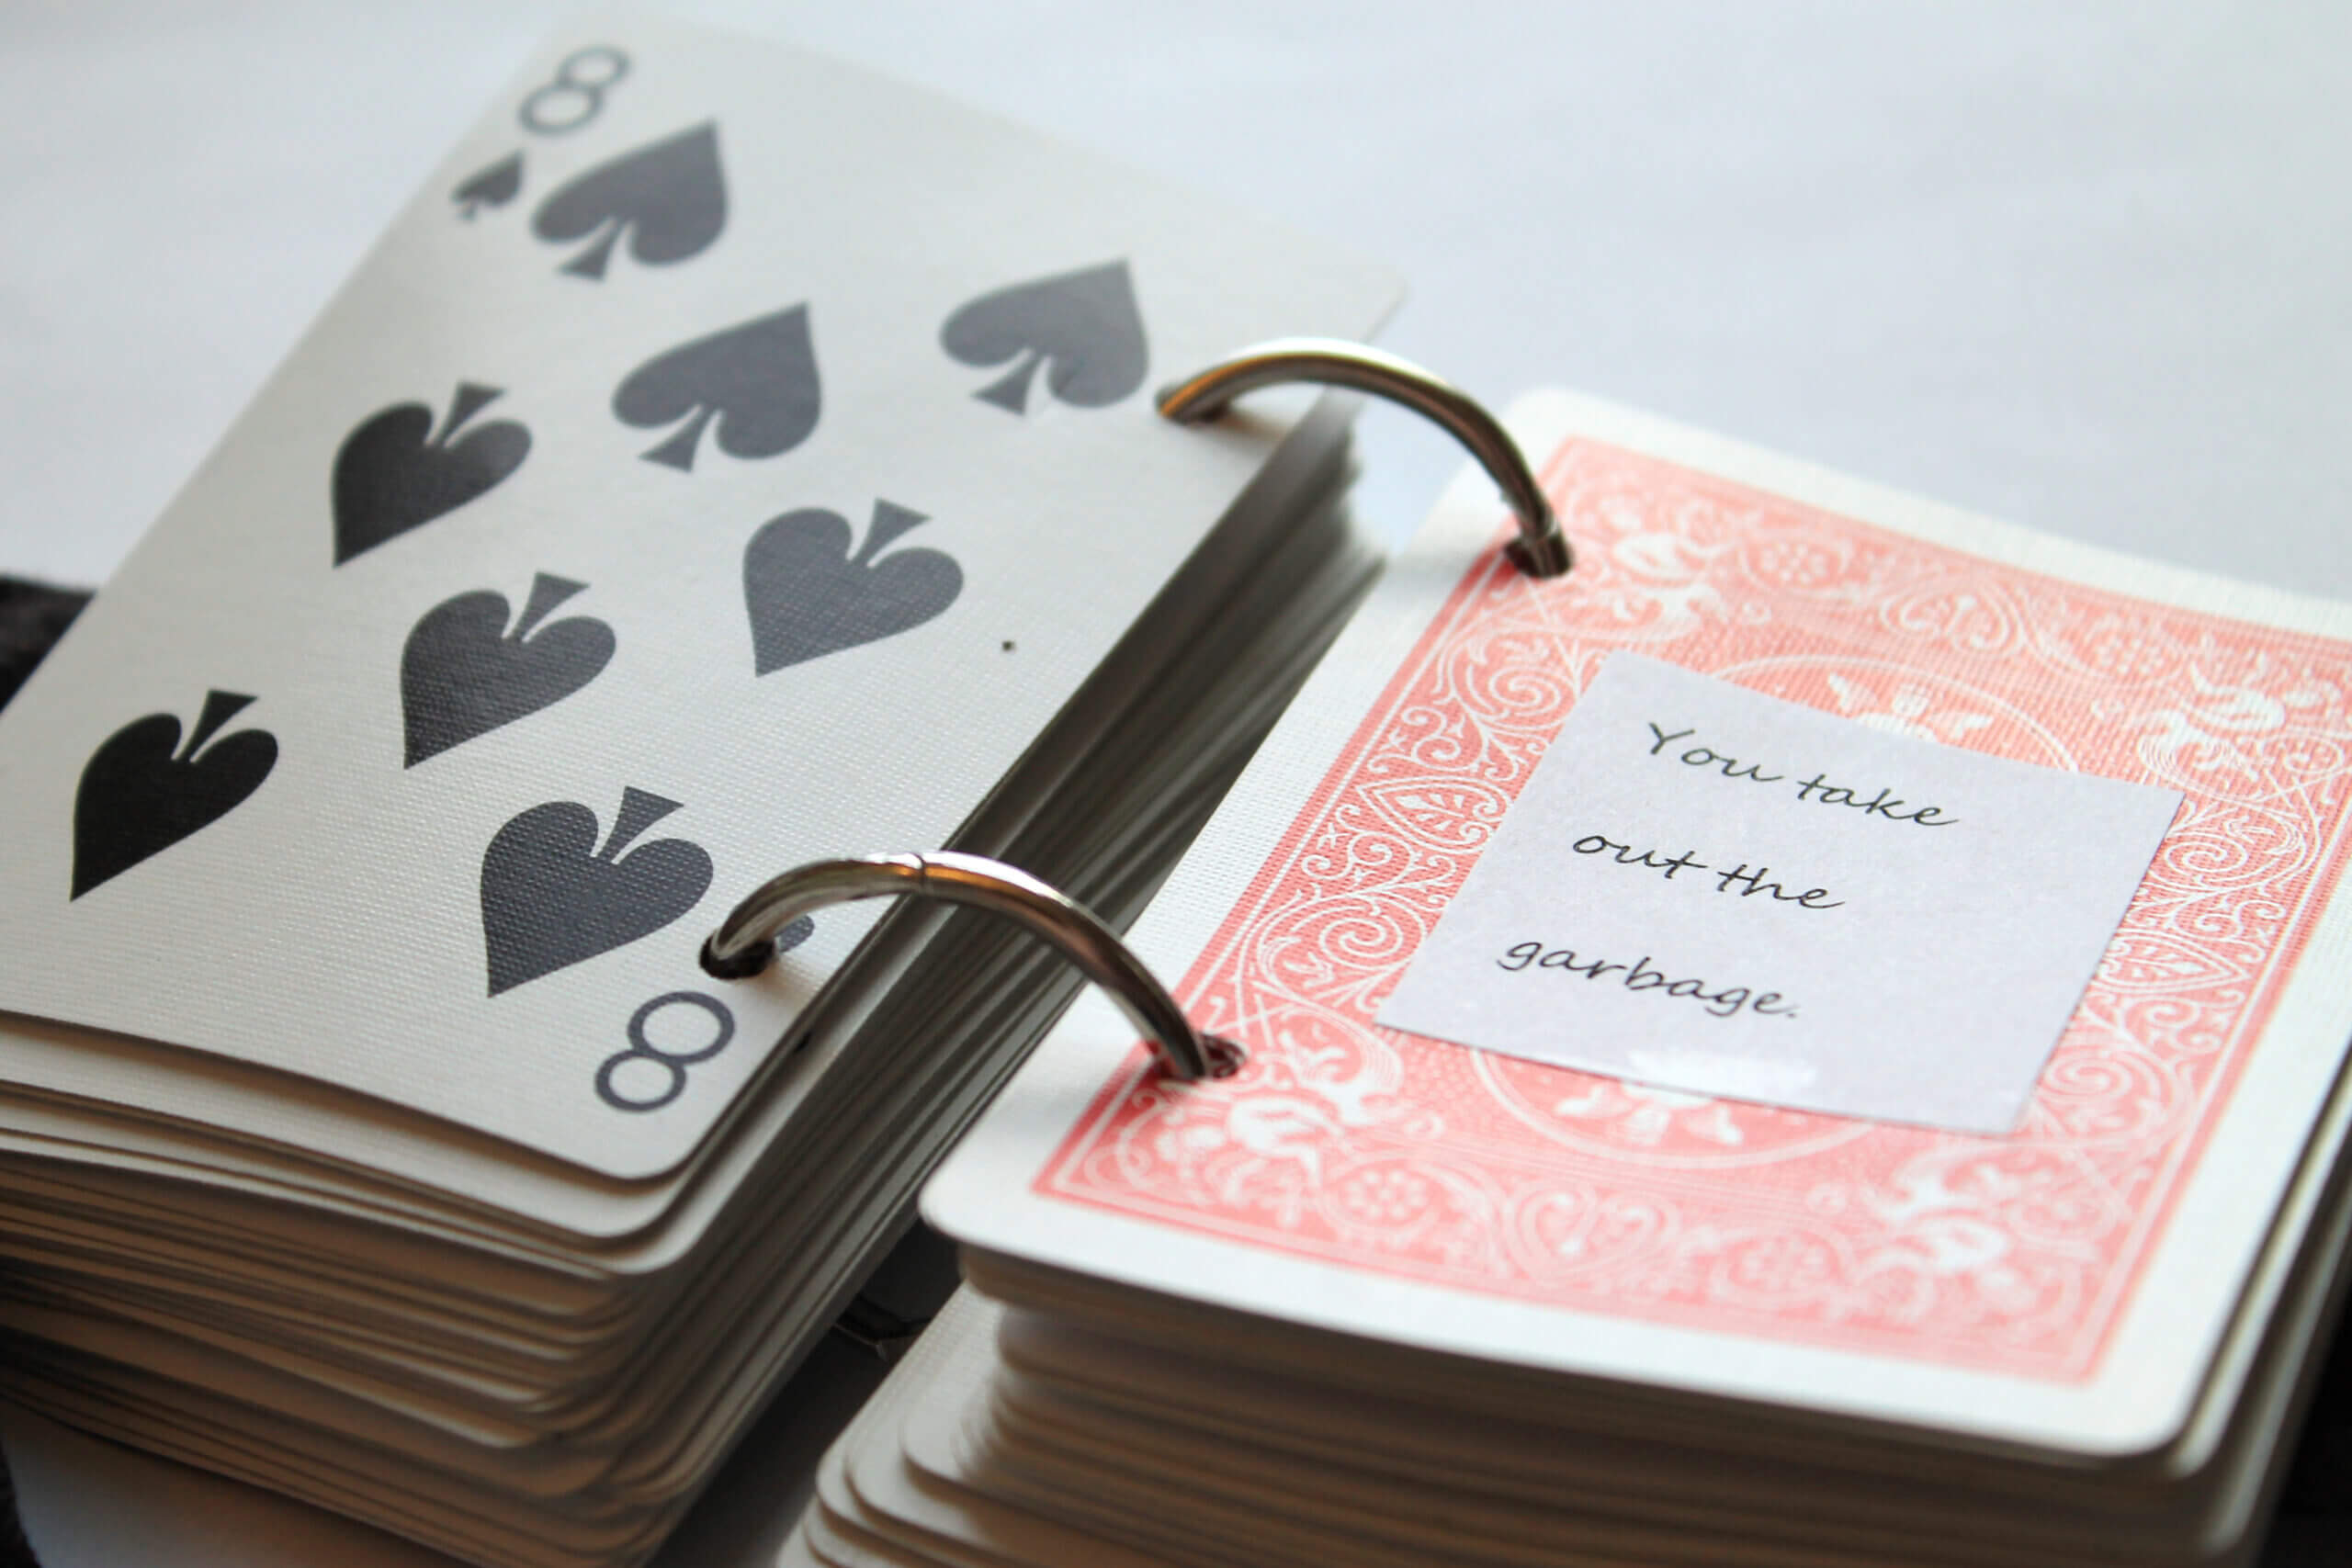 52 Reasons I Love You – Playing Card Book Tutorial Within 52 Things I Love About You Deck Of Cards Template